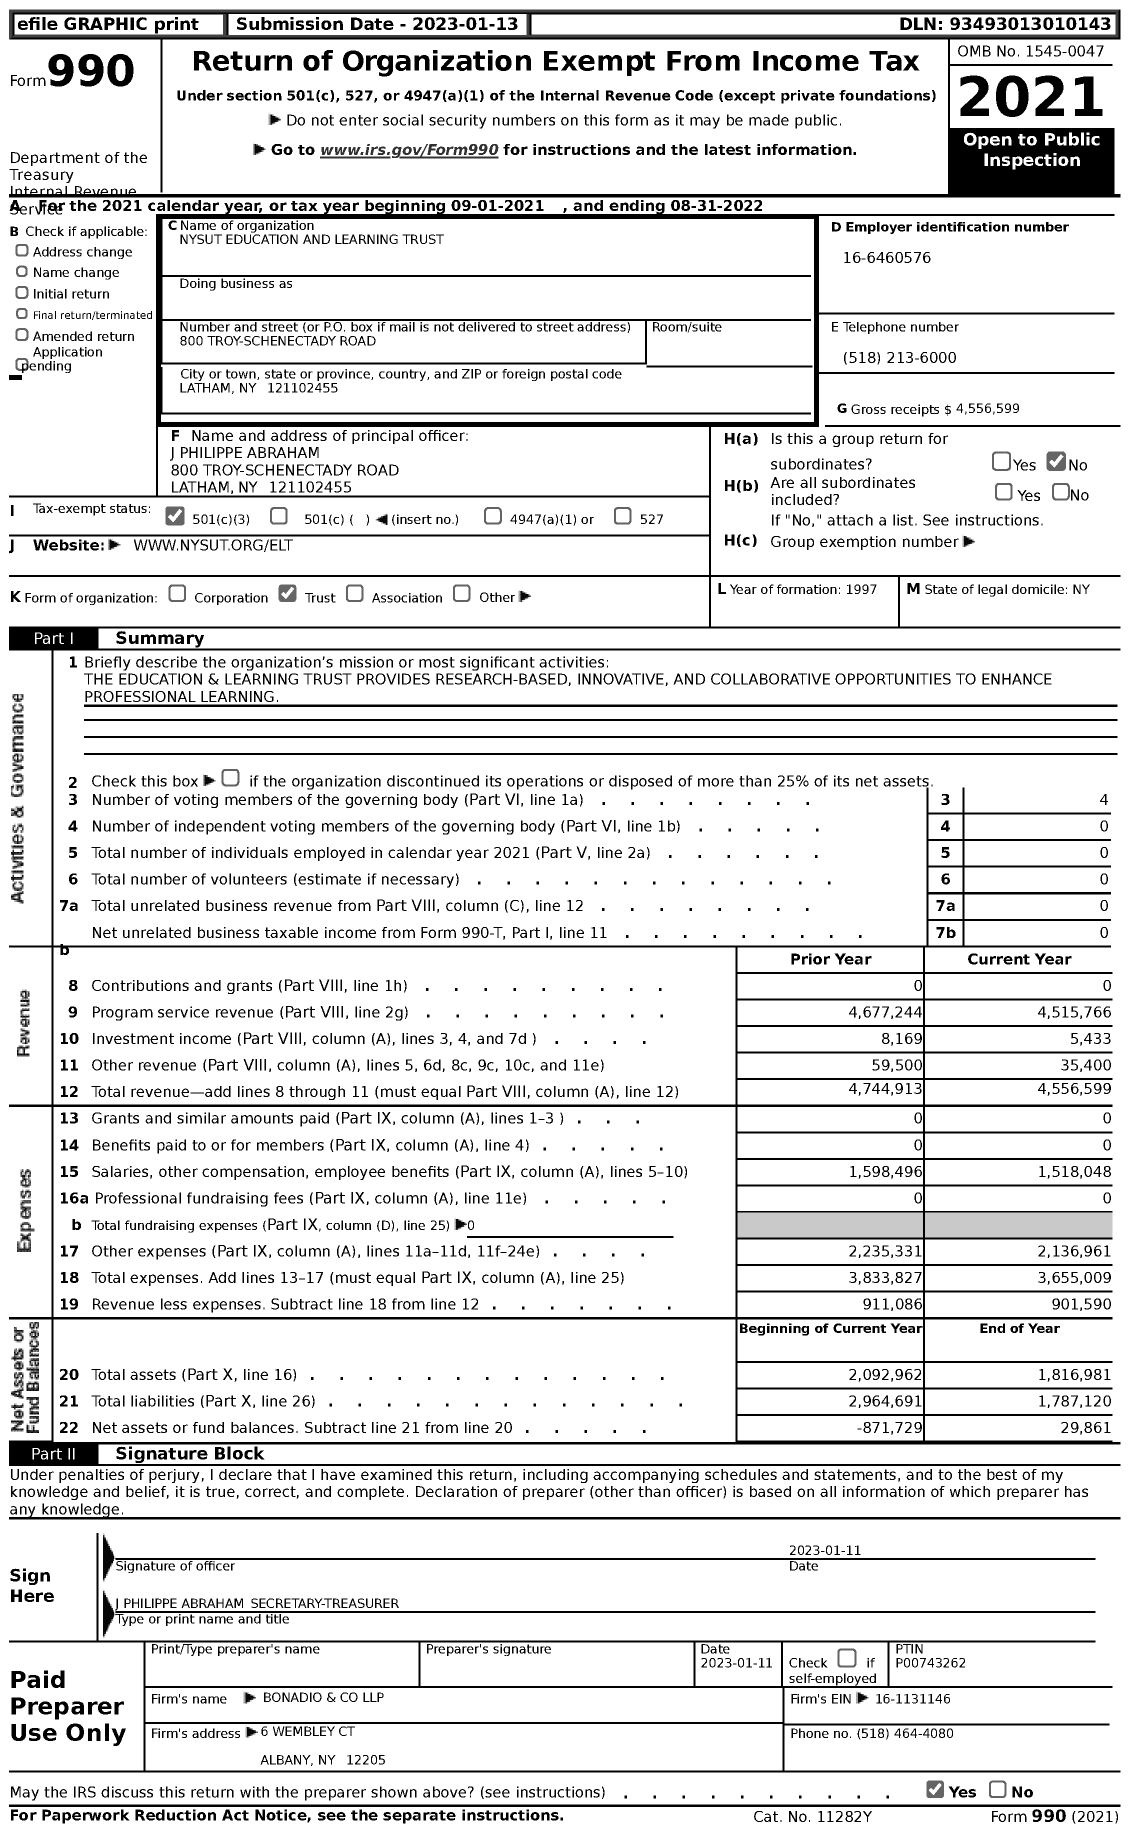 Image of first page of 2021 Form 990 for NYSUT Education and Learning Trust (ELT)